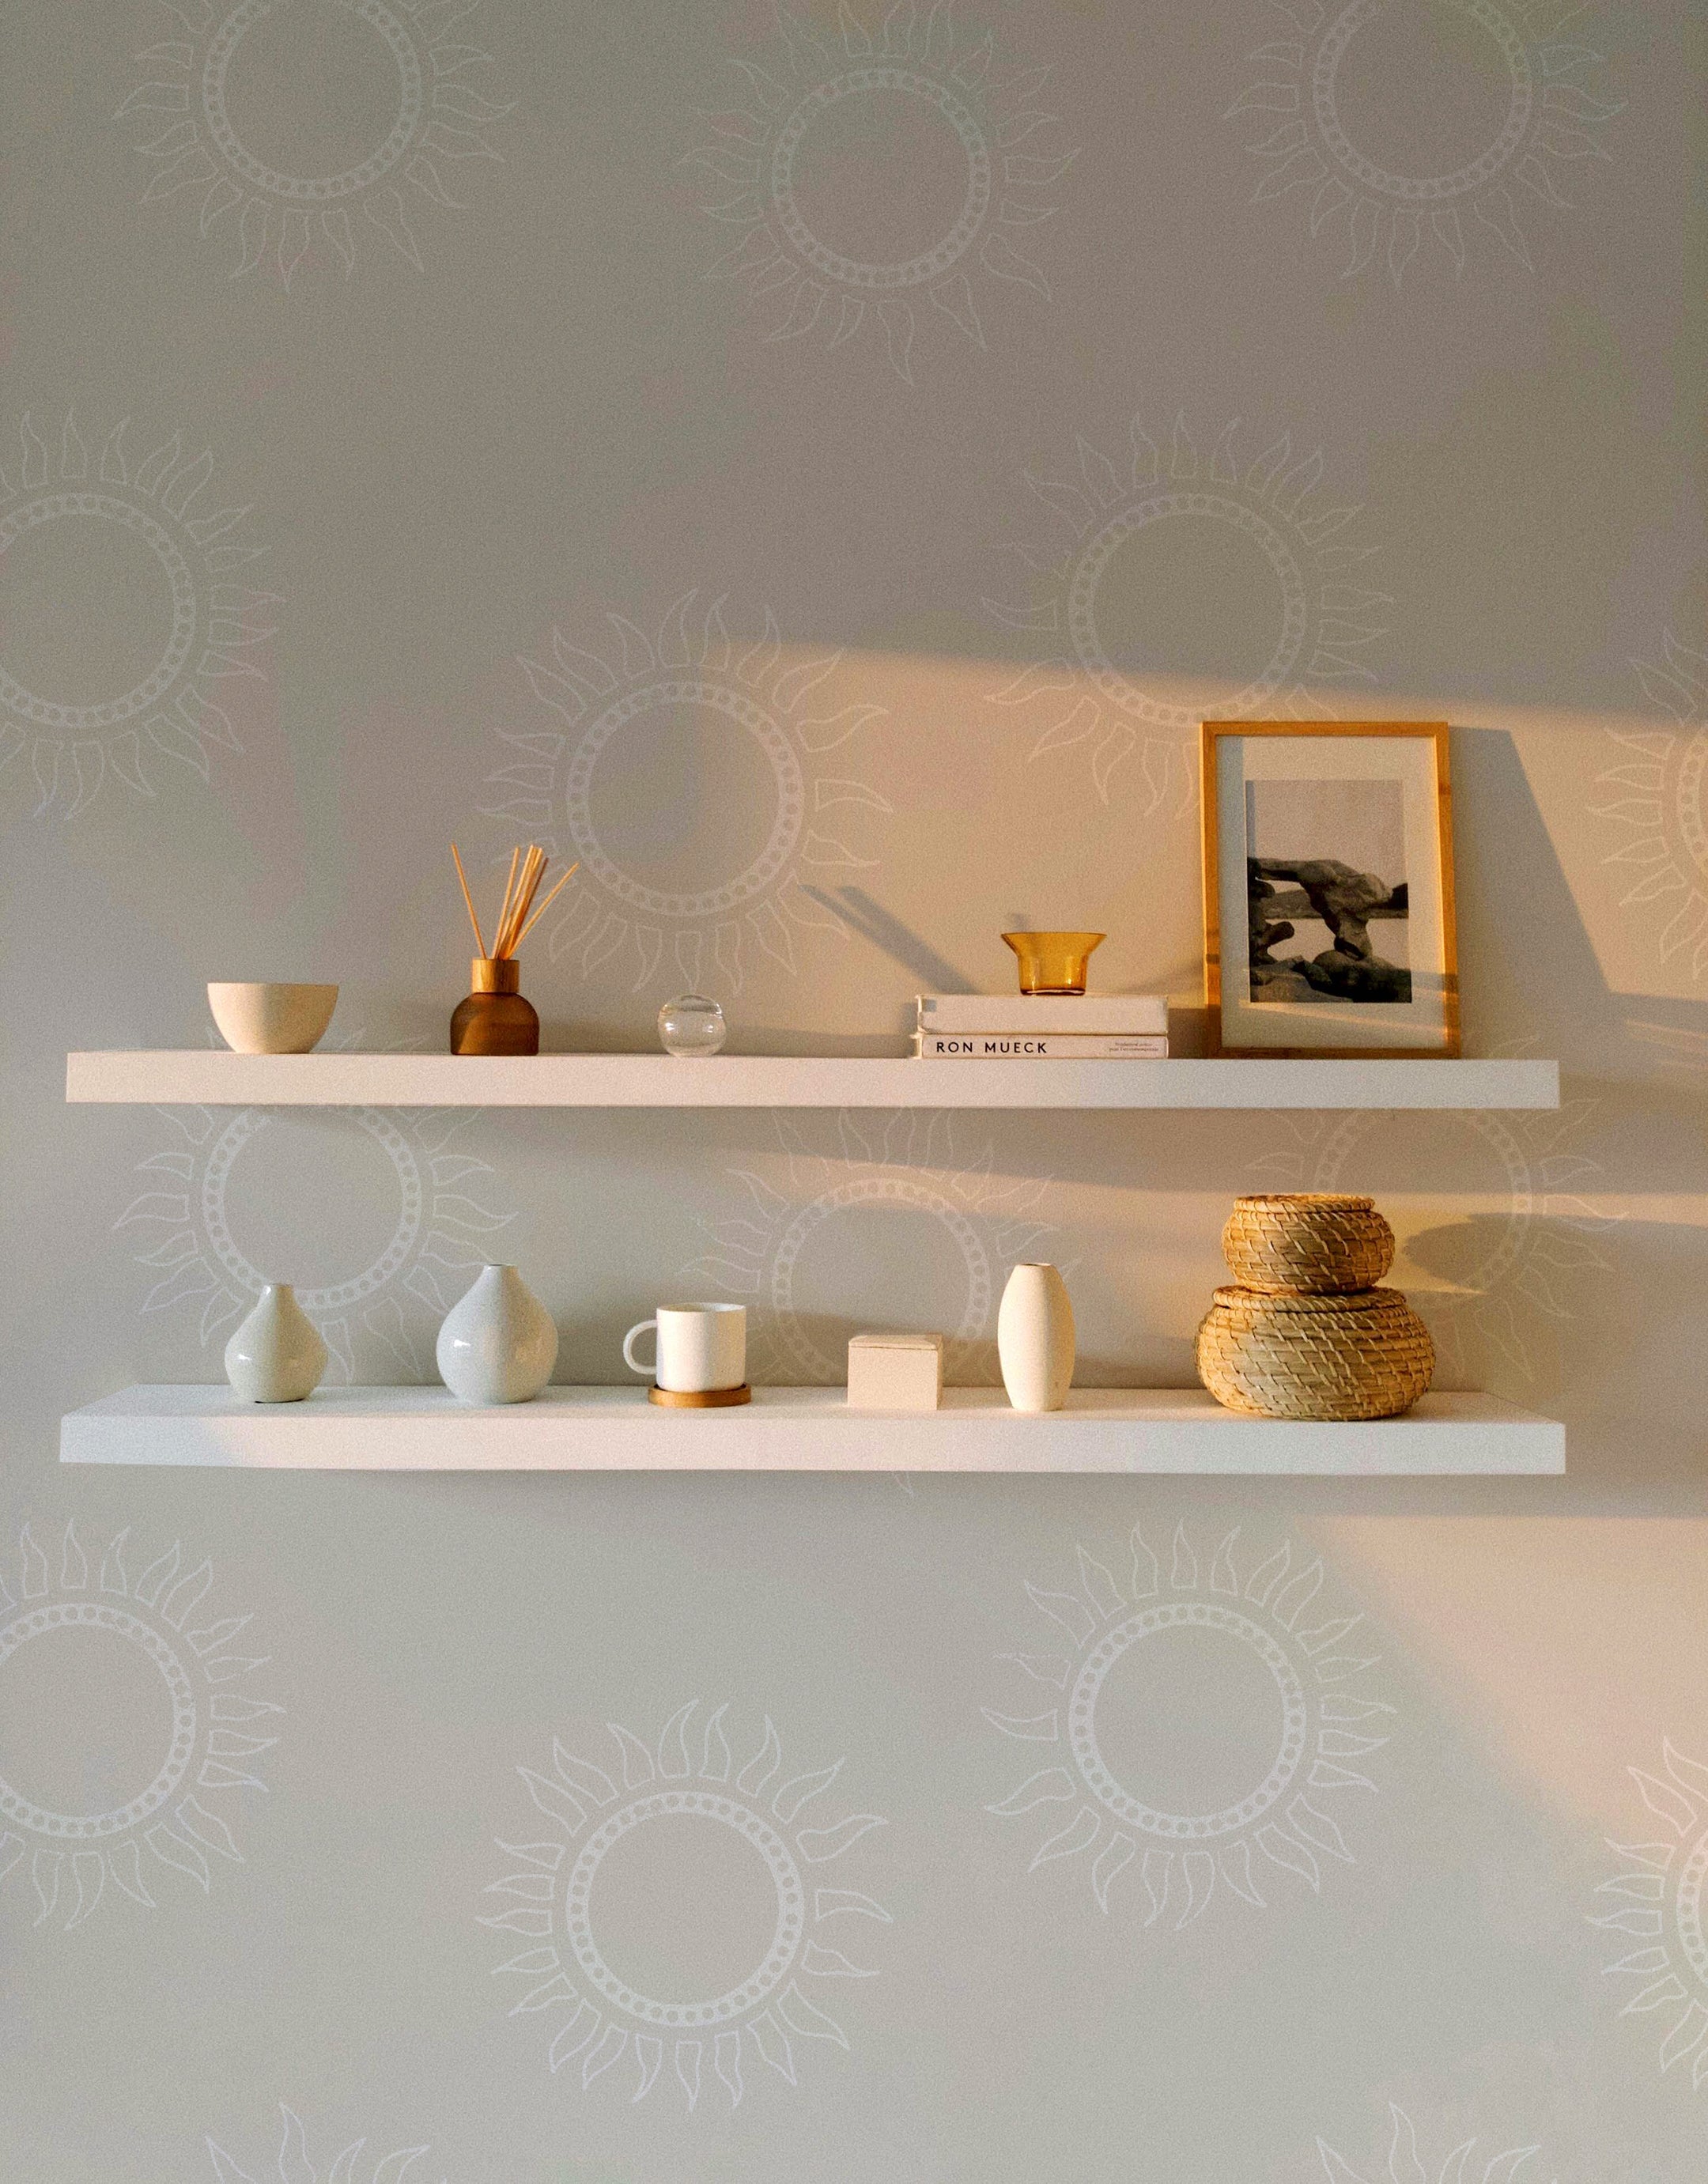 A room featuring Sunburst Harmony Wallpaper in a warm beige color. The wallpaper displays a subtle sunburst pattern in white. Two floating shelves hold various decorative items, including vases, a framed picture, and a small bowl, creating a minimalist and cozy look.